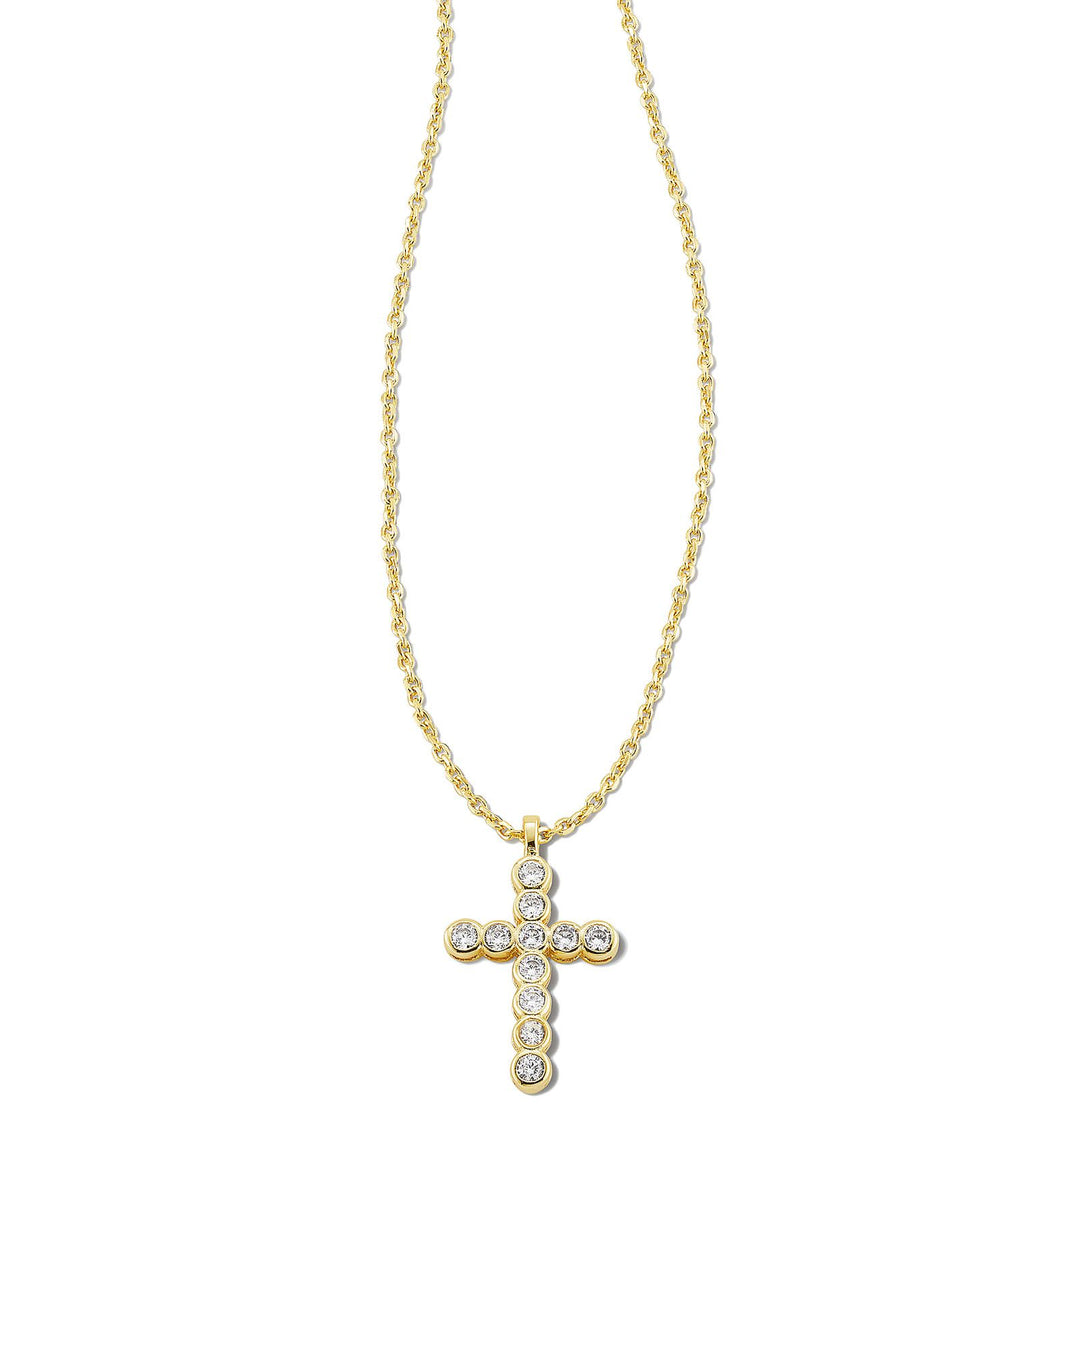 Kendra Scott Cross Crystal Pendant Necklace in Gold White Crystal